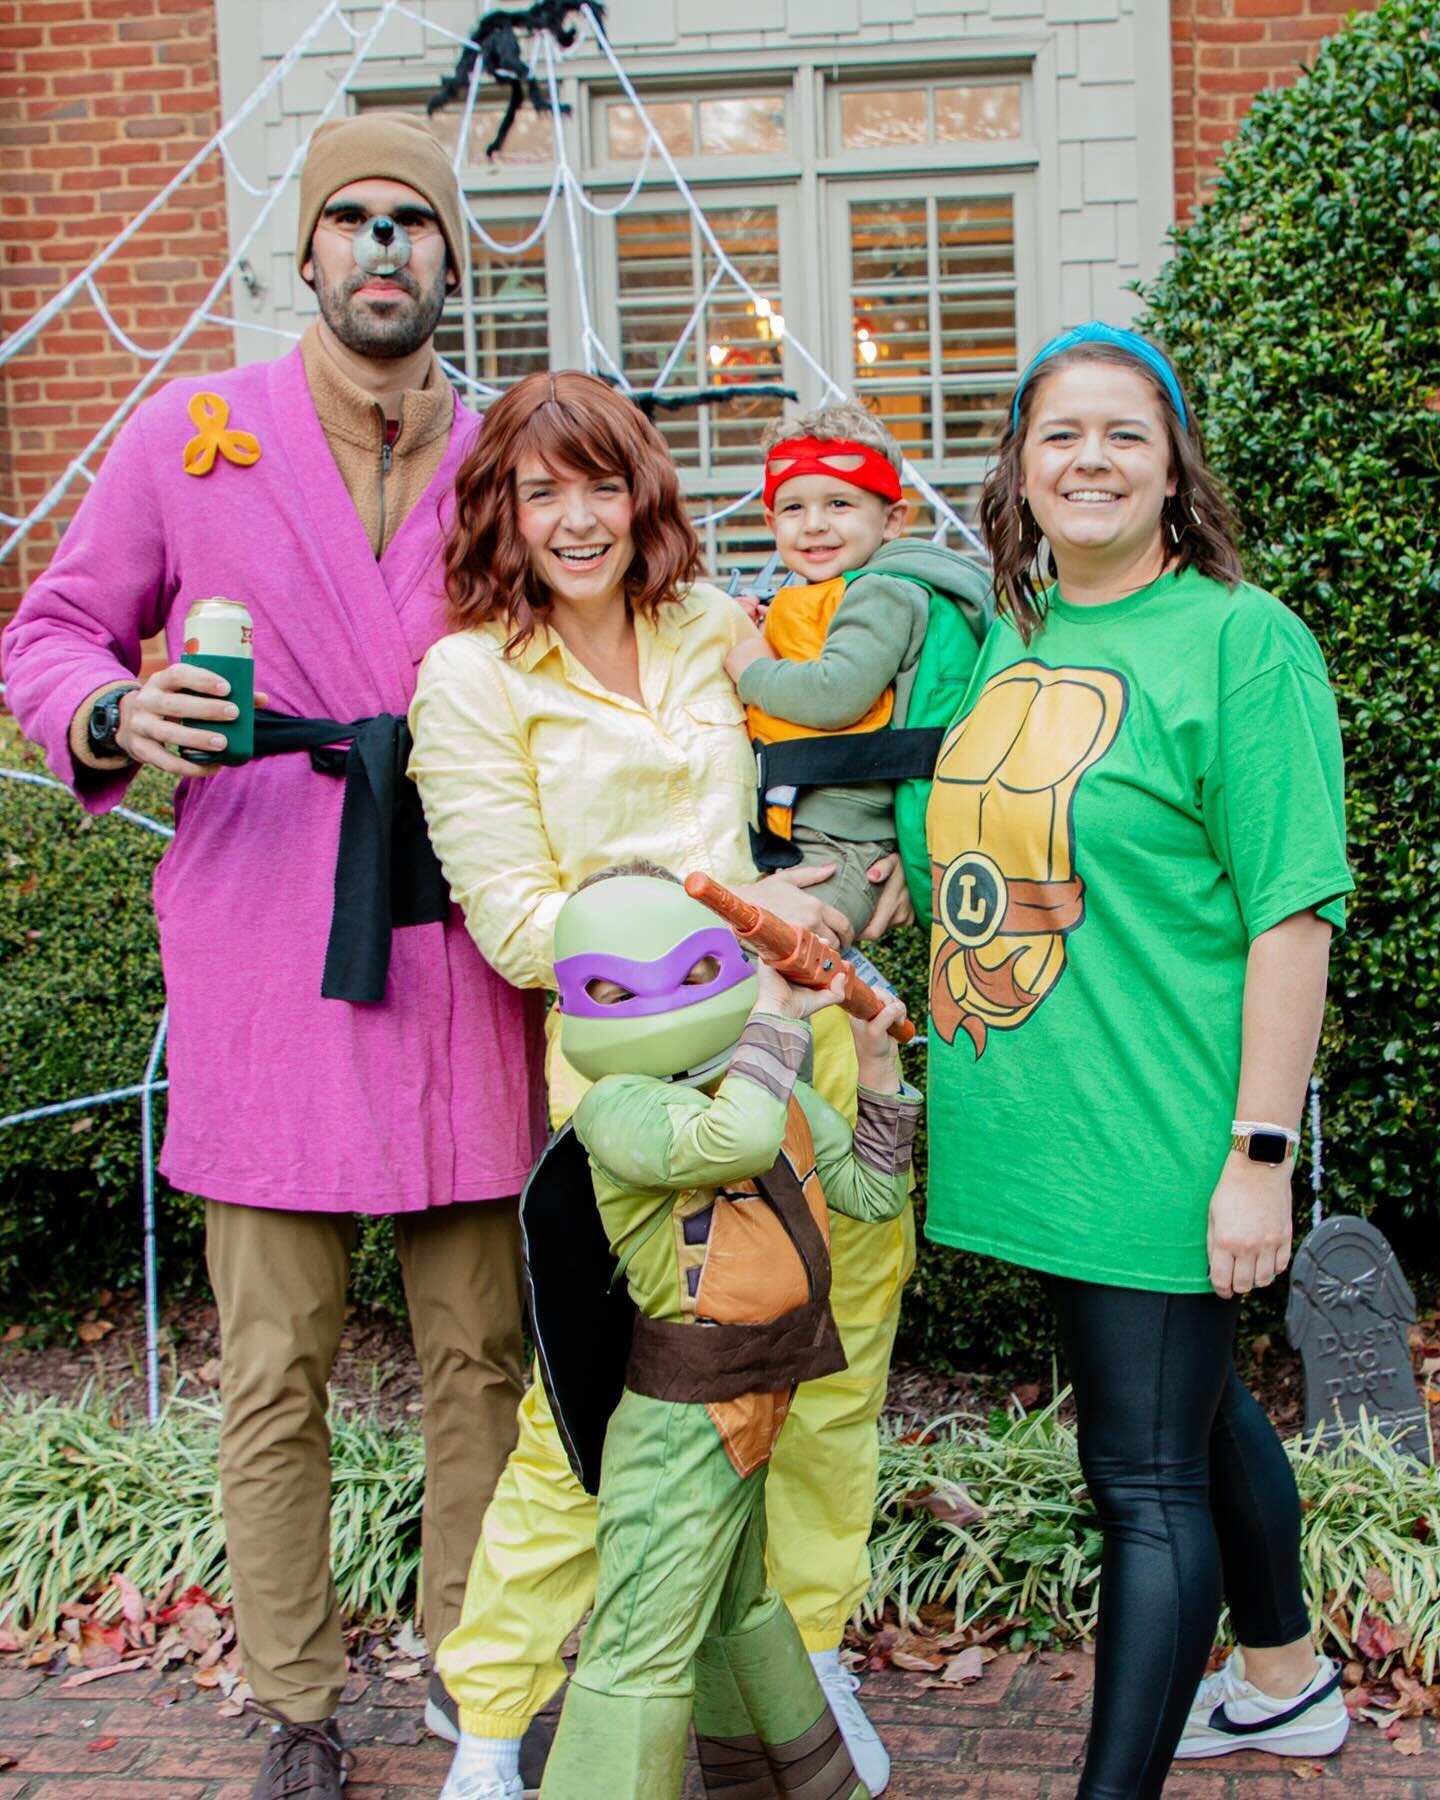 (One month late but who&rsquo;s counting?) 

Our last Halloween in GA (for a while) and we went out with a bang as the Ninja Turtle gang! 🎃 🕷️ 👻 

Michael- Splinter 🐭 🤎
Me- April O&rsquo;Neil 🎥💛
Emily- Leonardo 🐢 💙
David- Donatello 🐢 💜
And